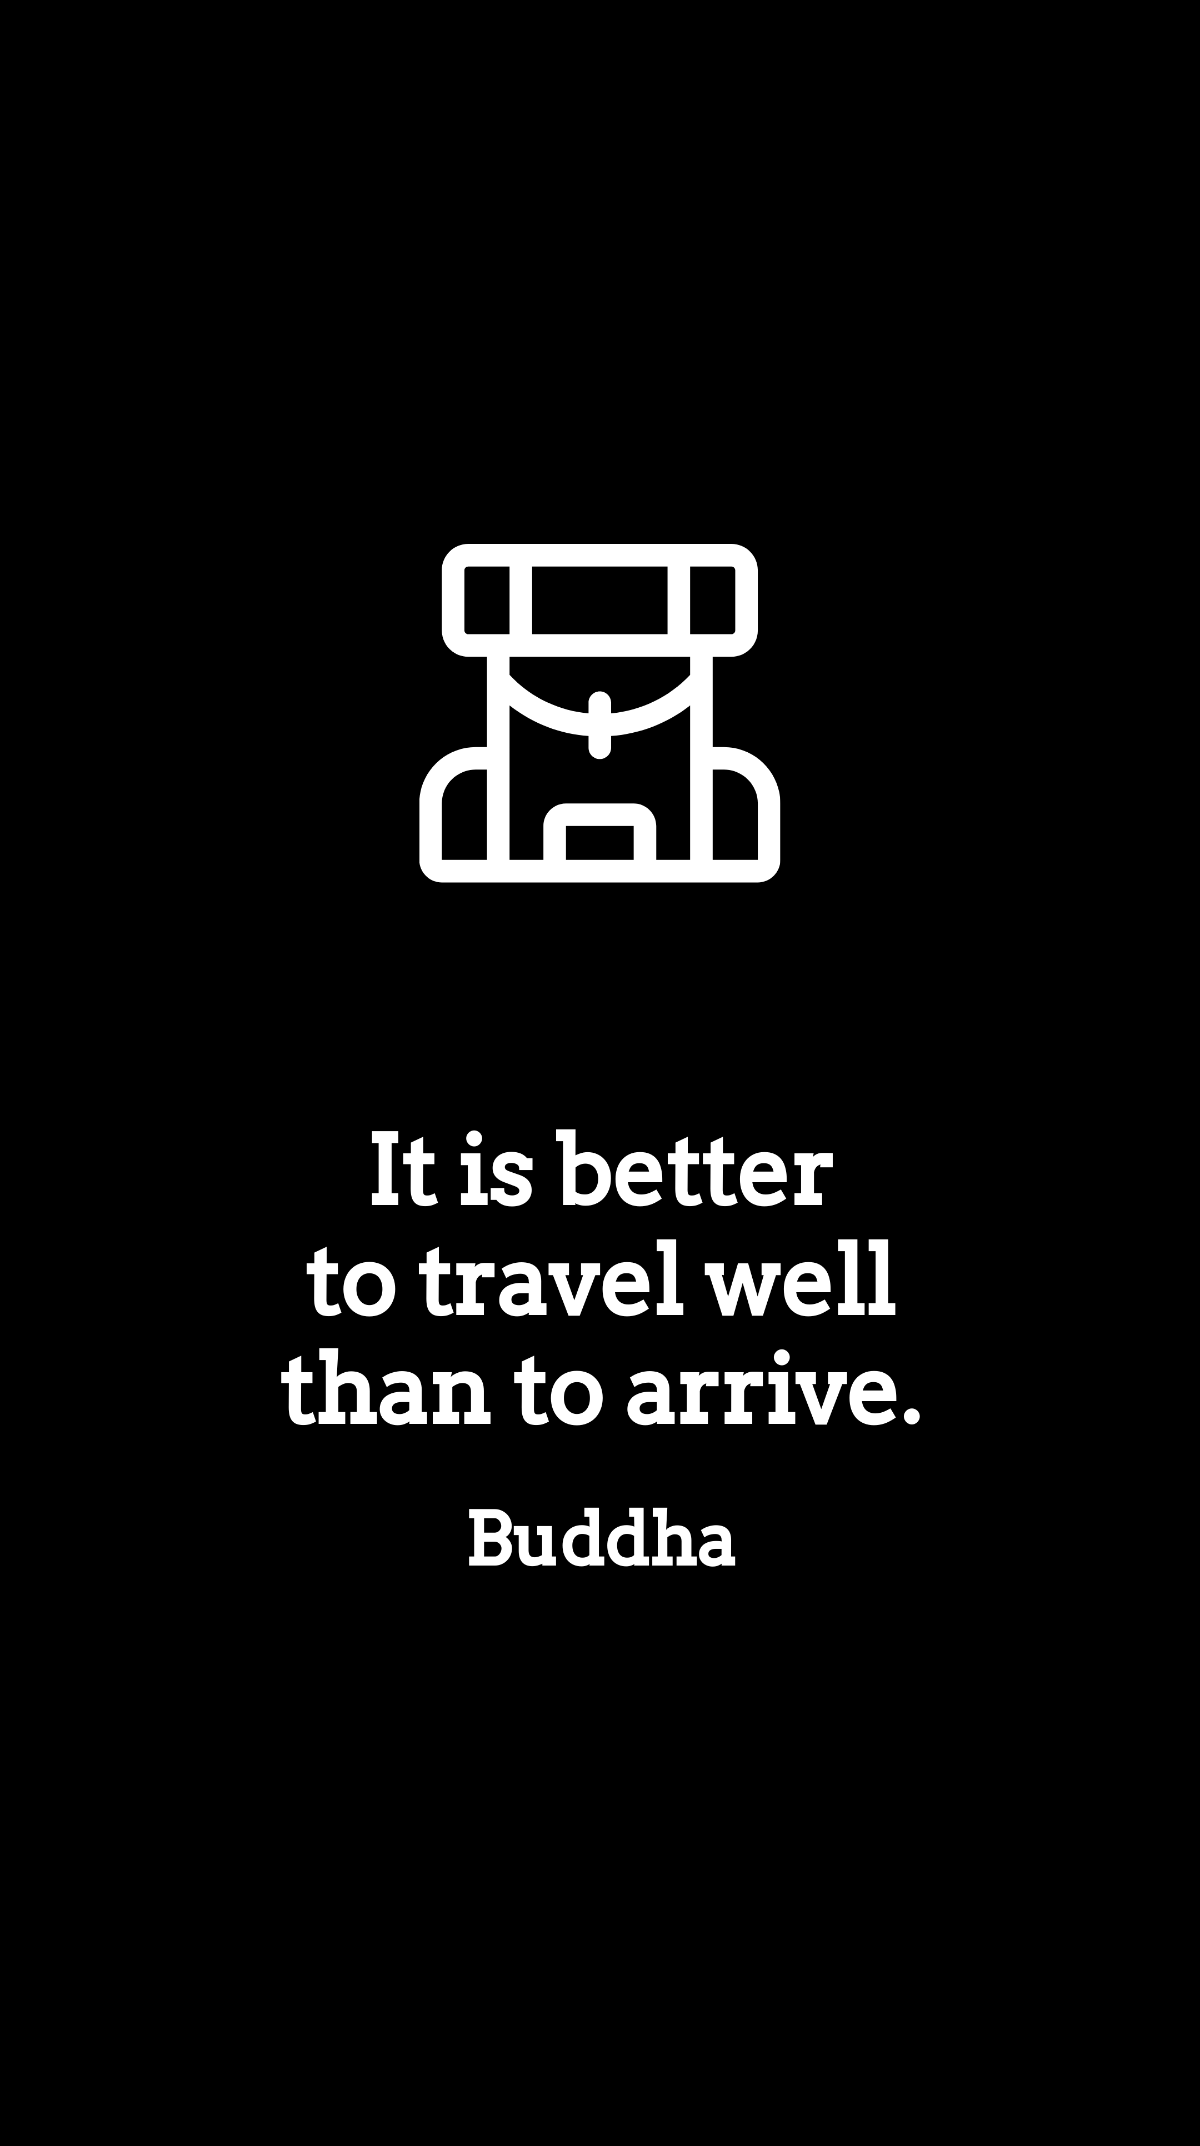 Free Buddha - It is better to travel well than to arrive. Template